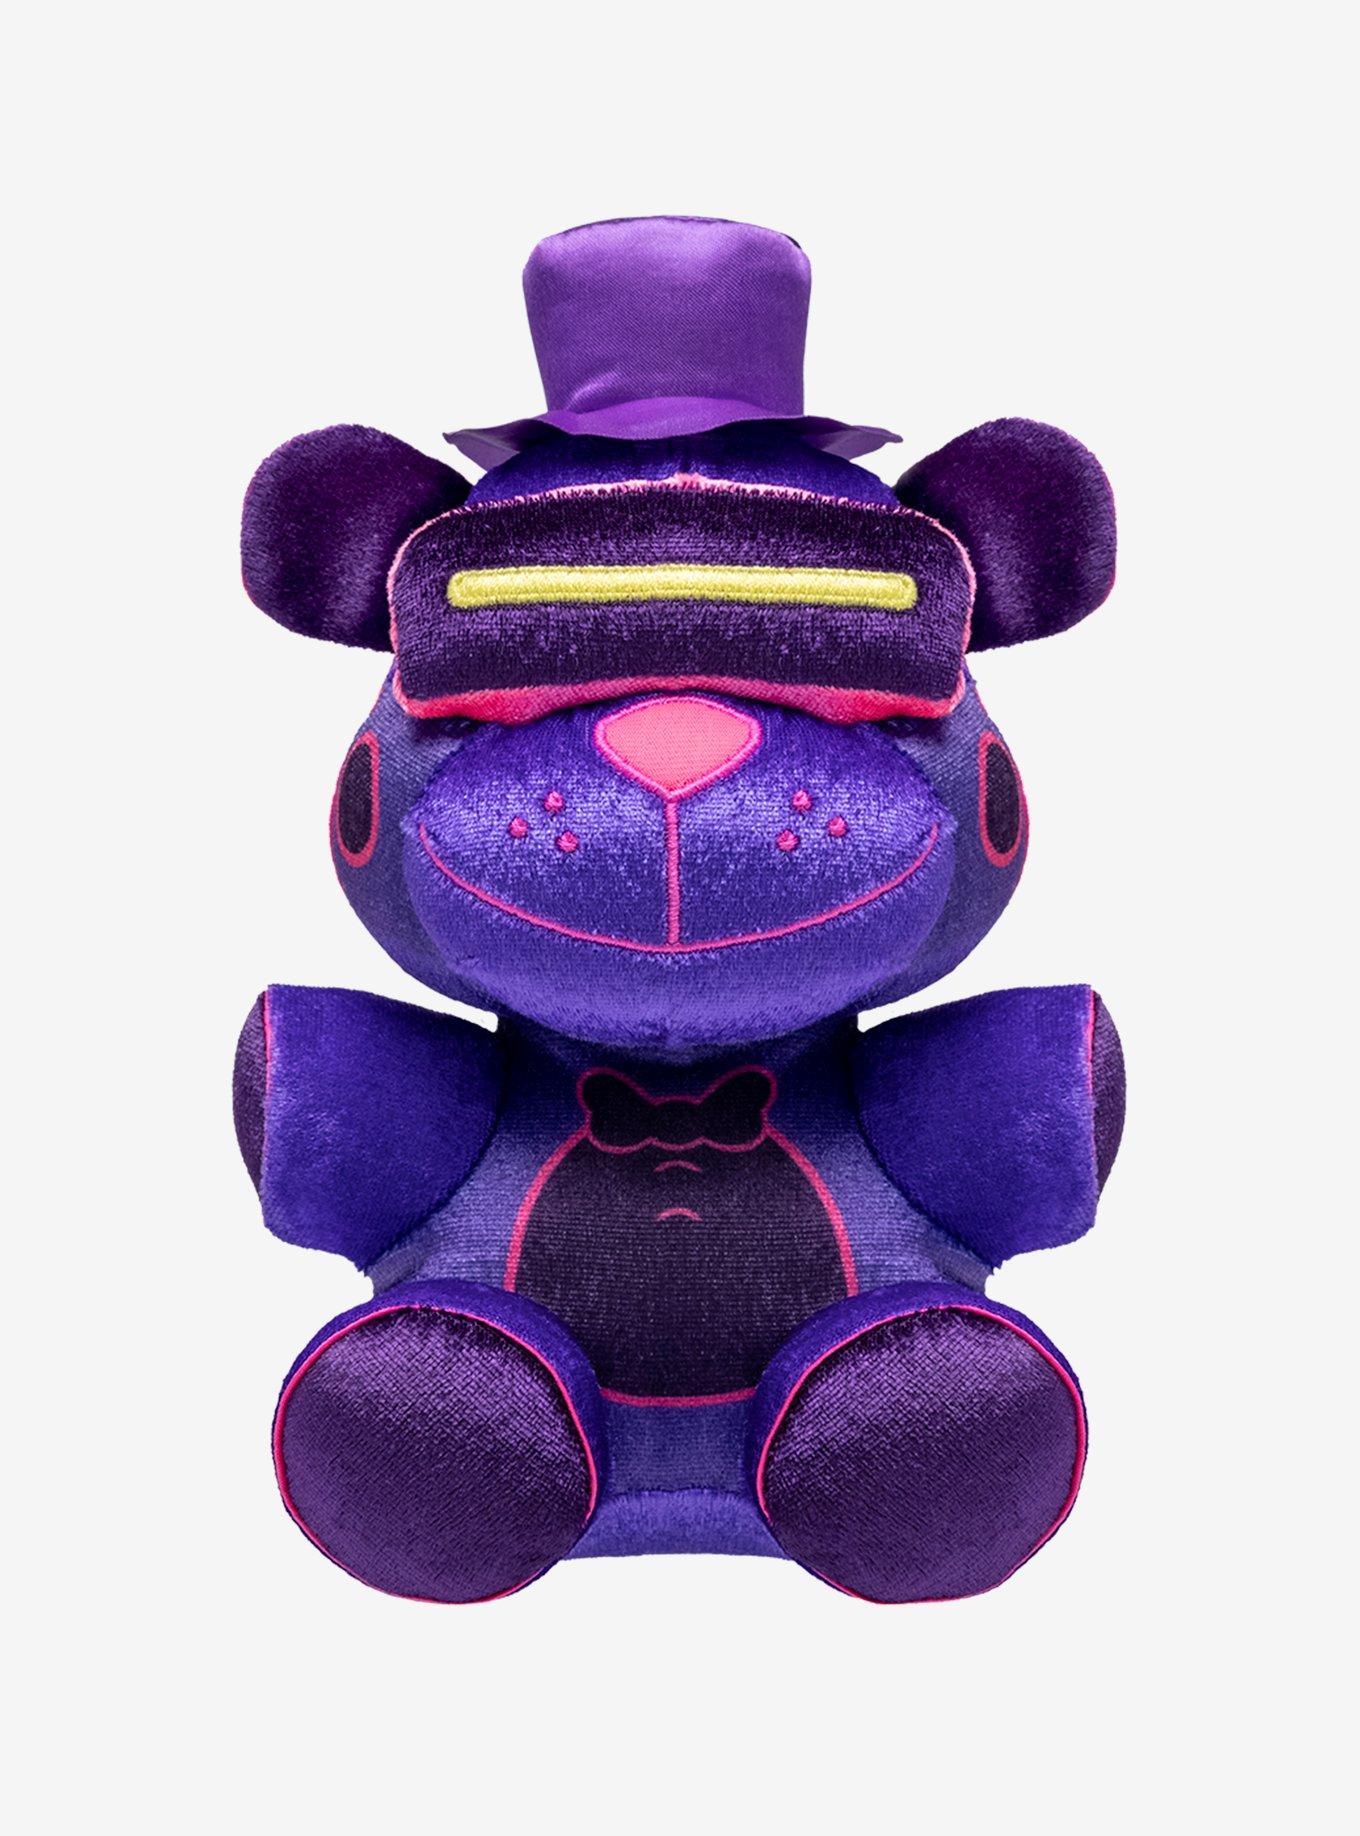 FNAF AR Plush Review Part 3: The Walmart Exclusives 